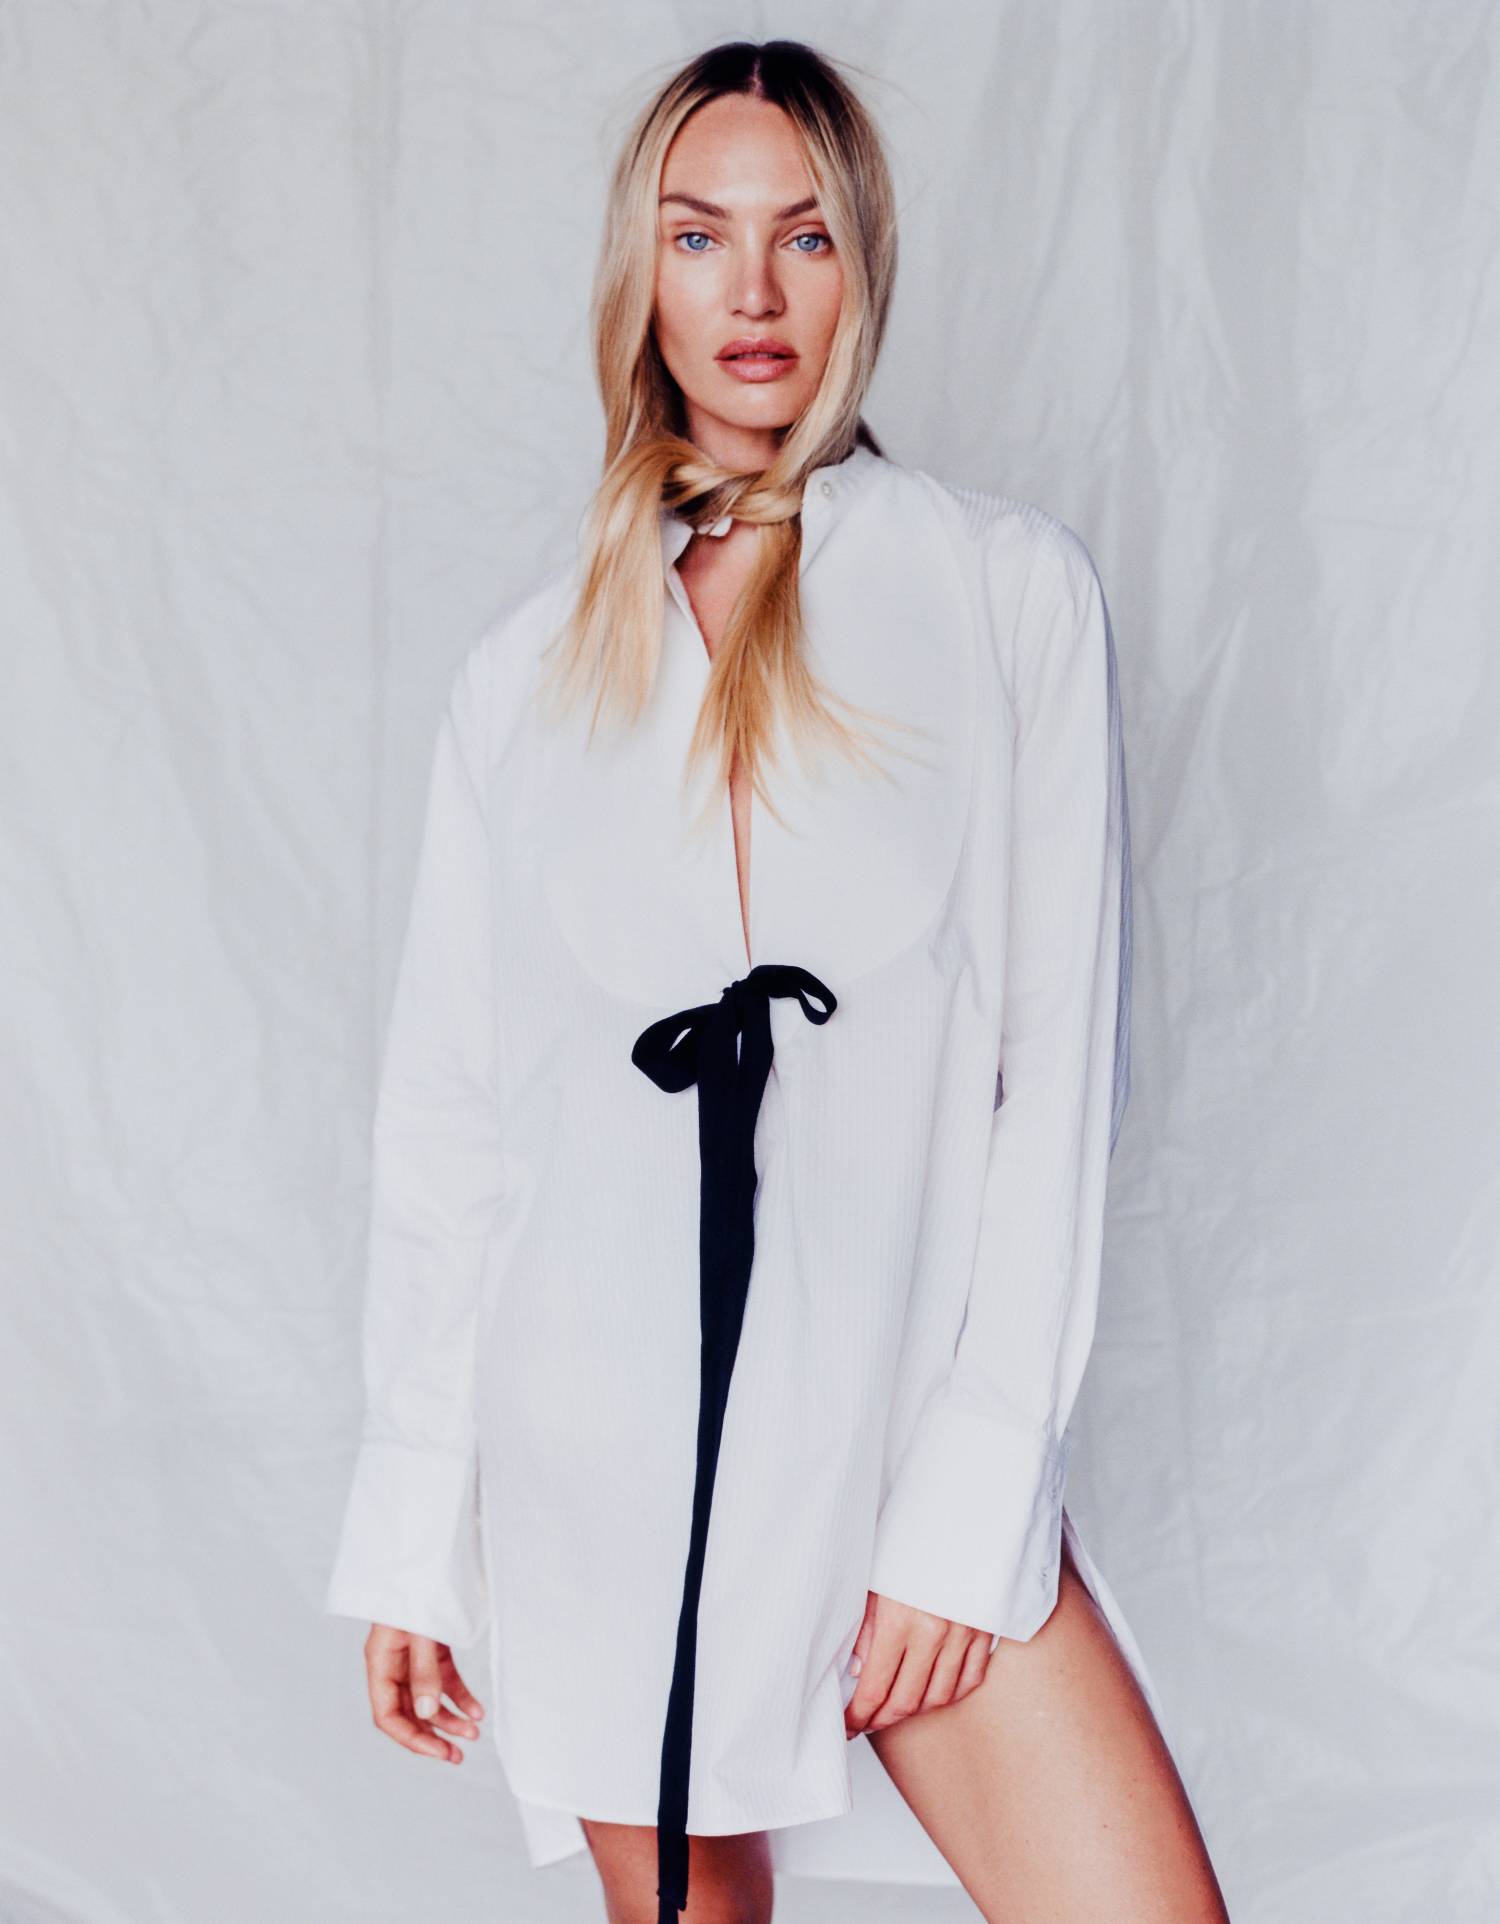 Candice Swanepoel in Plan C White Bib-Front Cotton Shirt with Bow Detail for Puss Puss Magazine Fall-Winter 2023